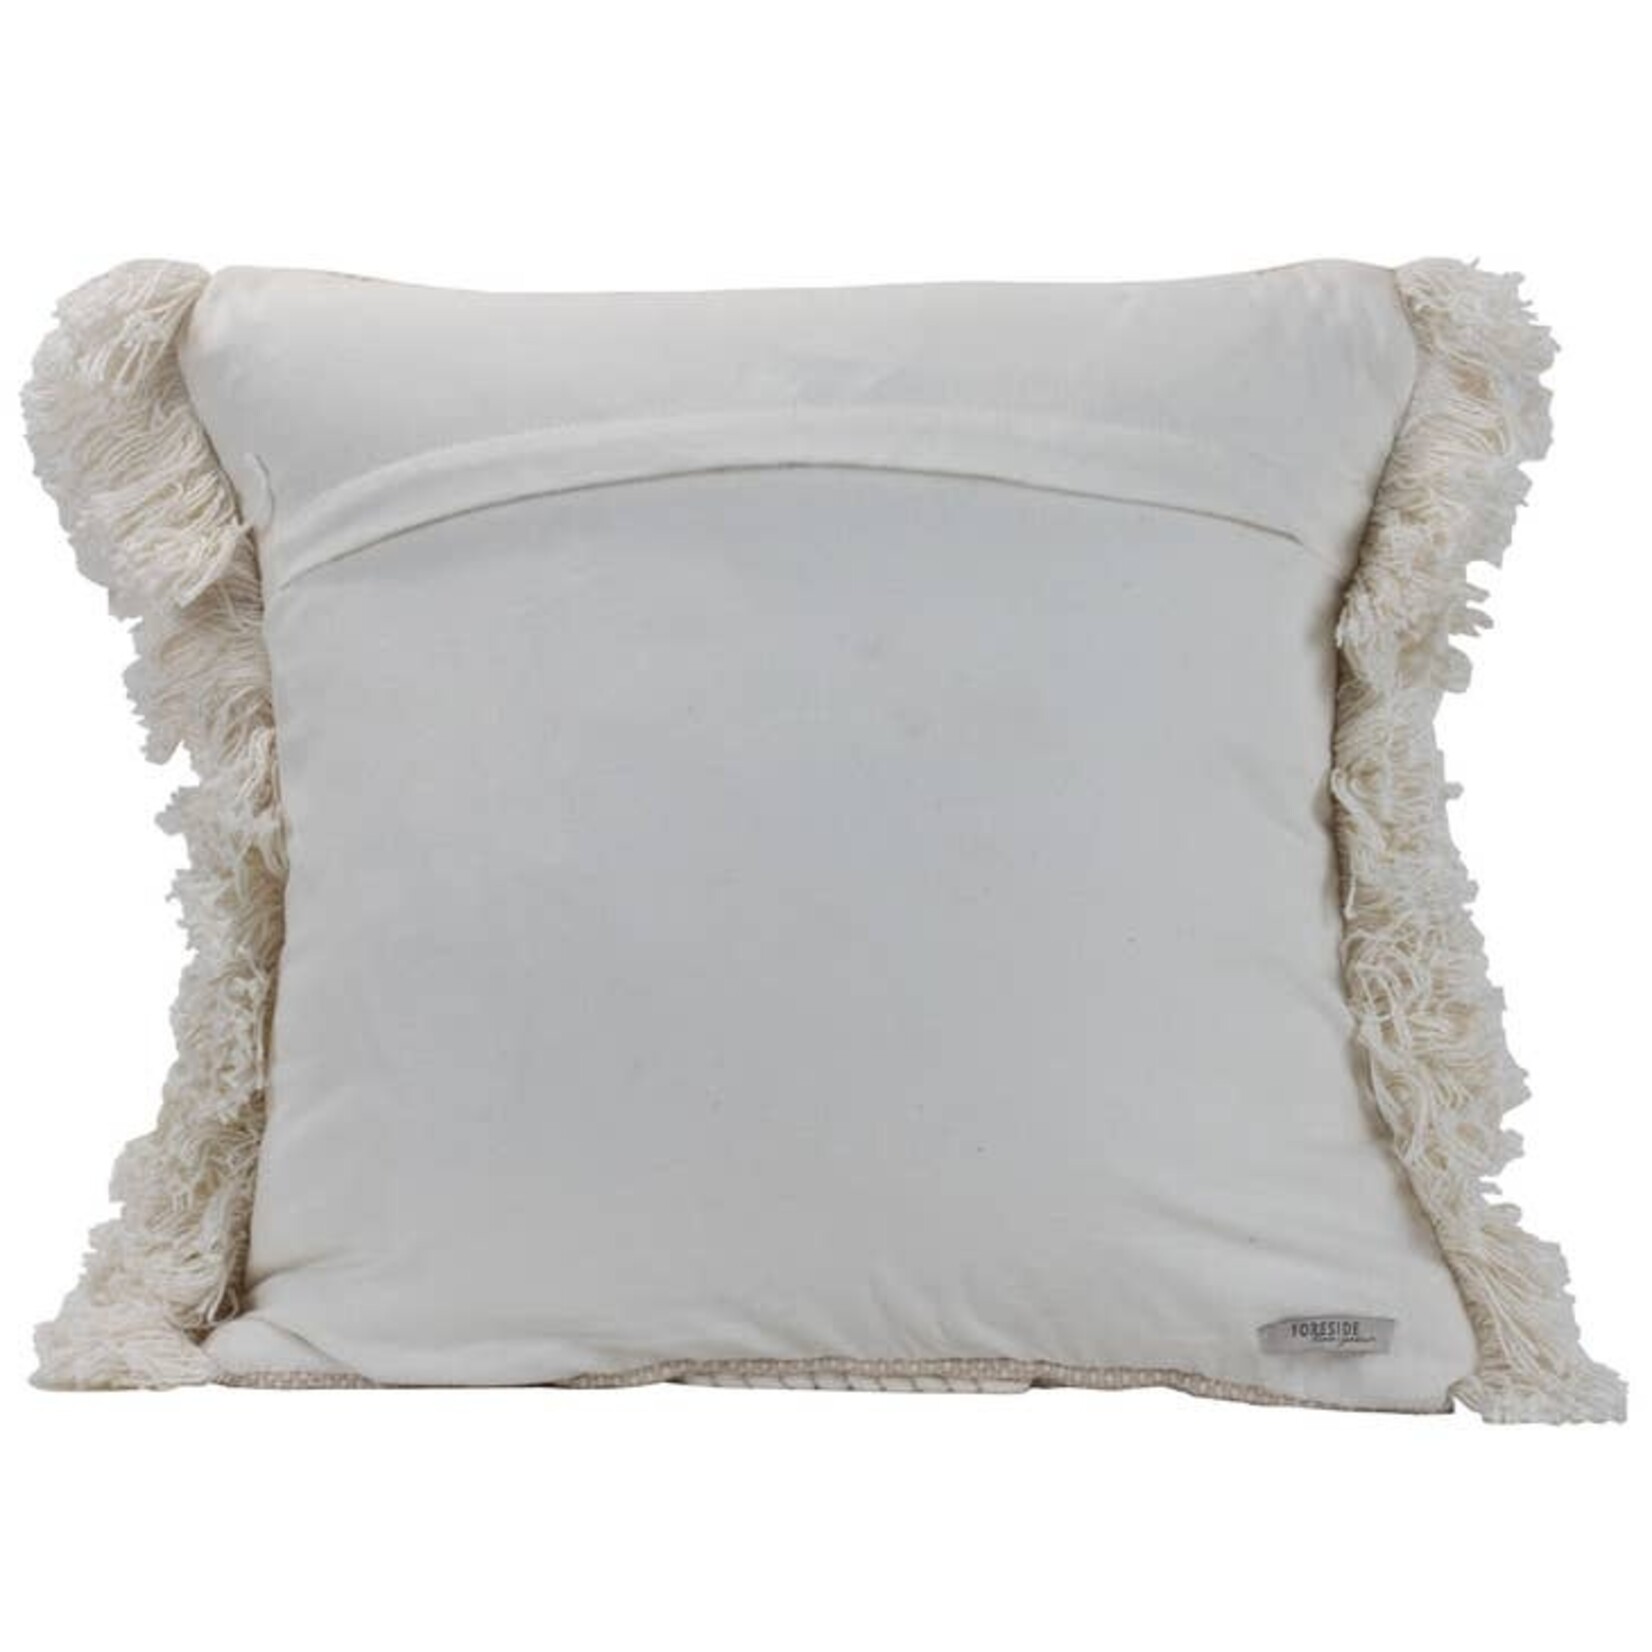 Handwoven Pillow Two-tone w Fringe - 18x18